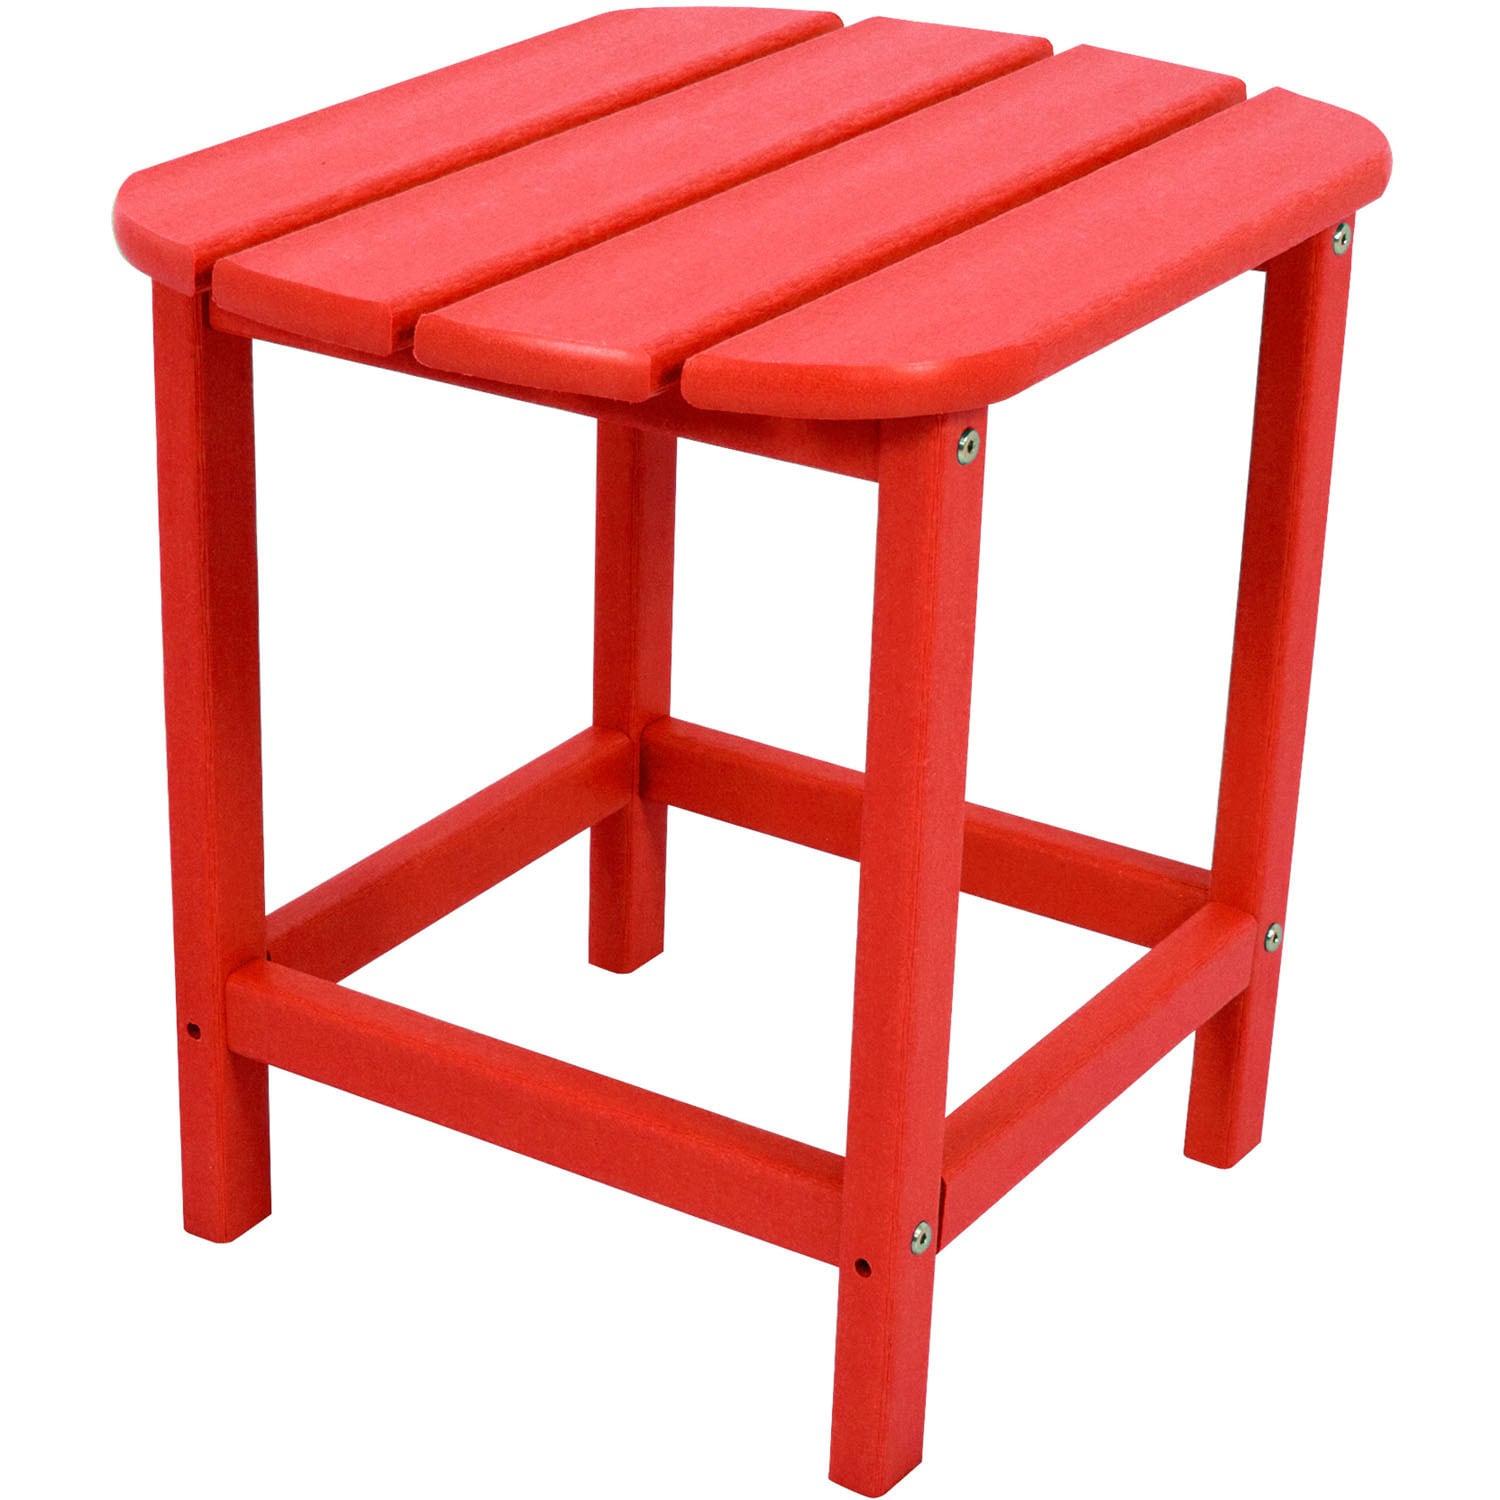 Hanover Outdoor Sunset Red All-weather Side Table